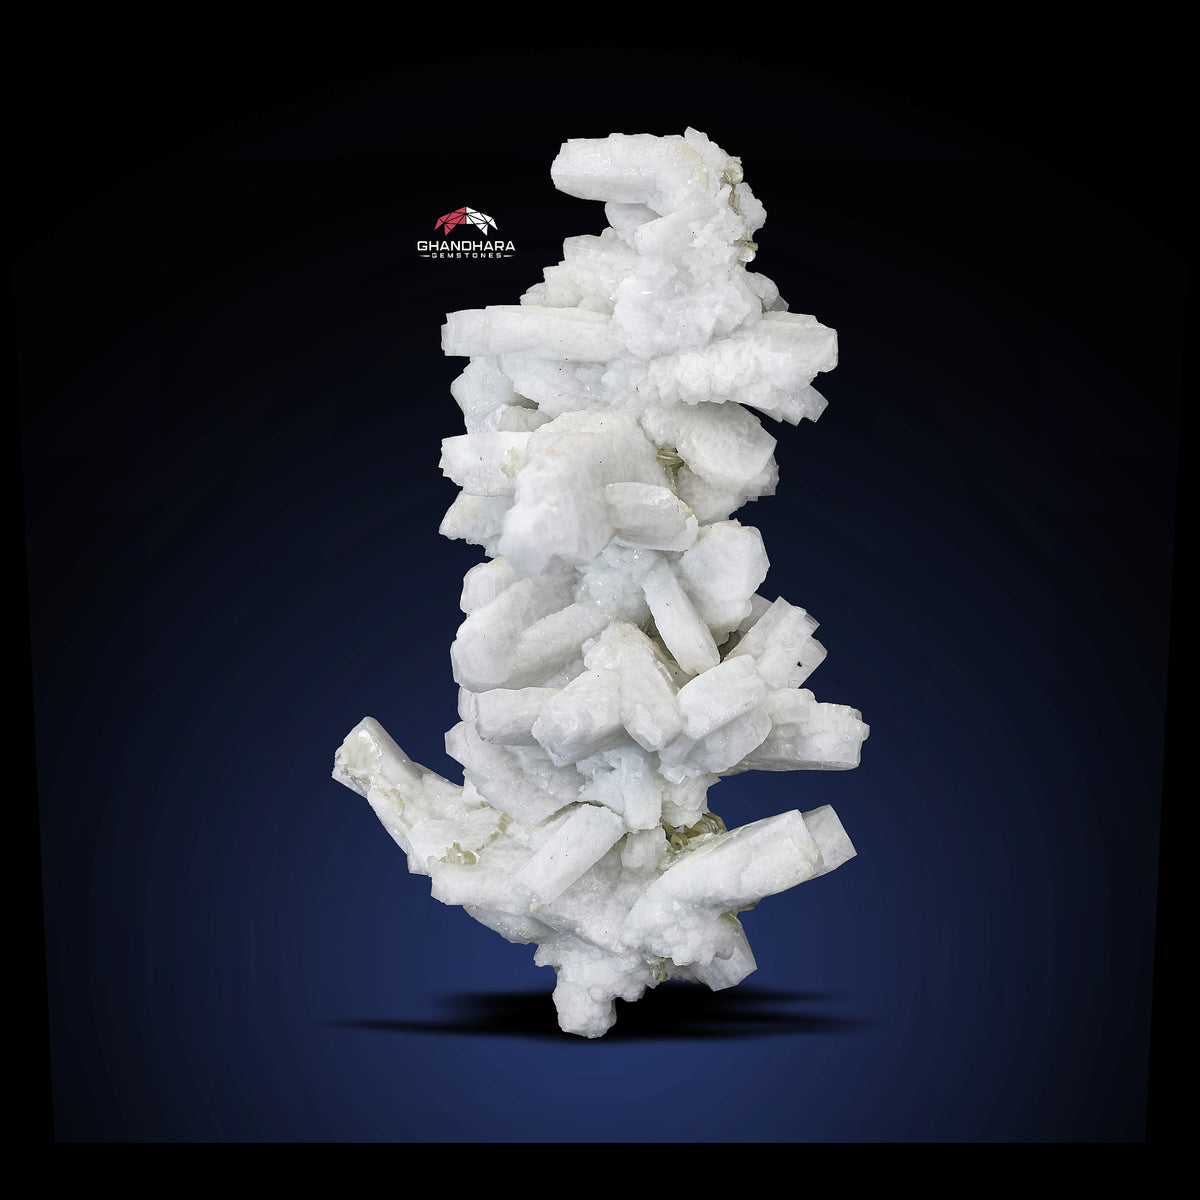 Sculptural Robust Cluster Of Microcline Crystals With Milky White Color